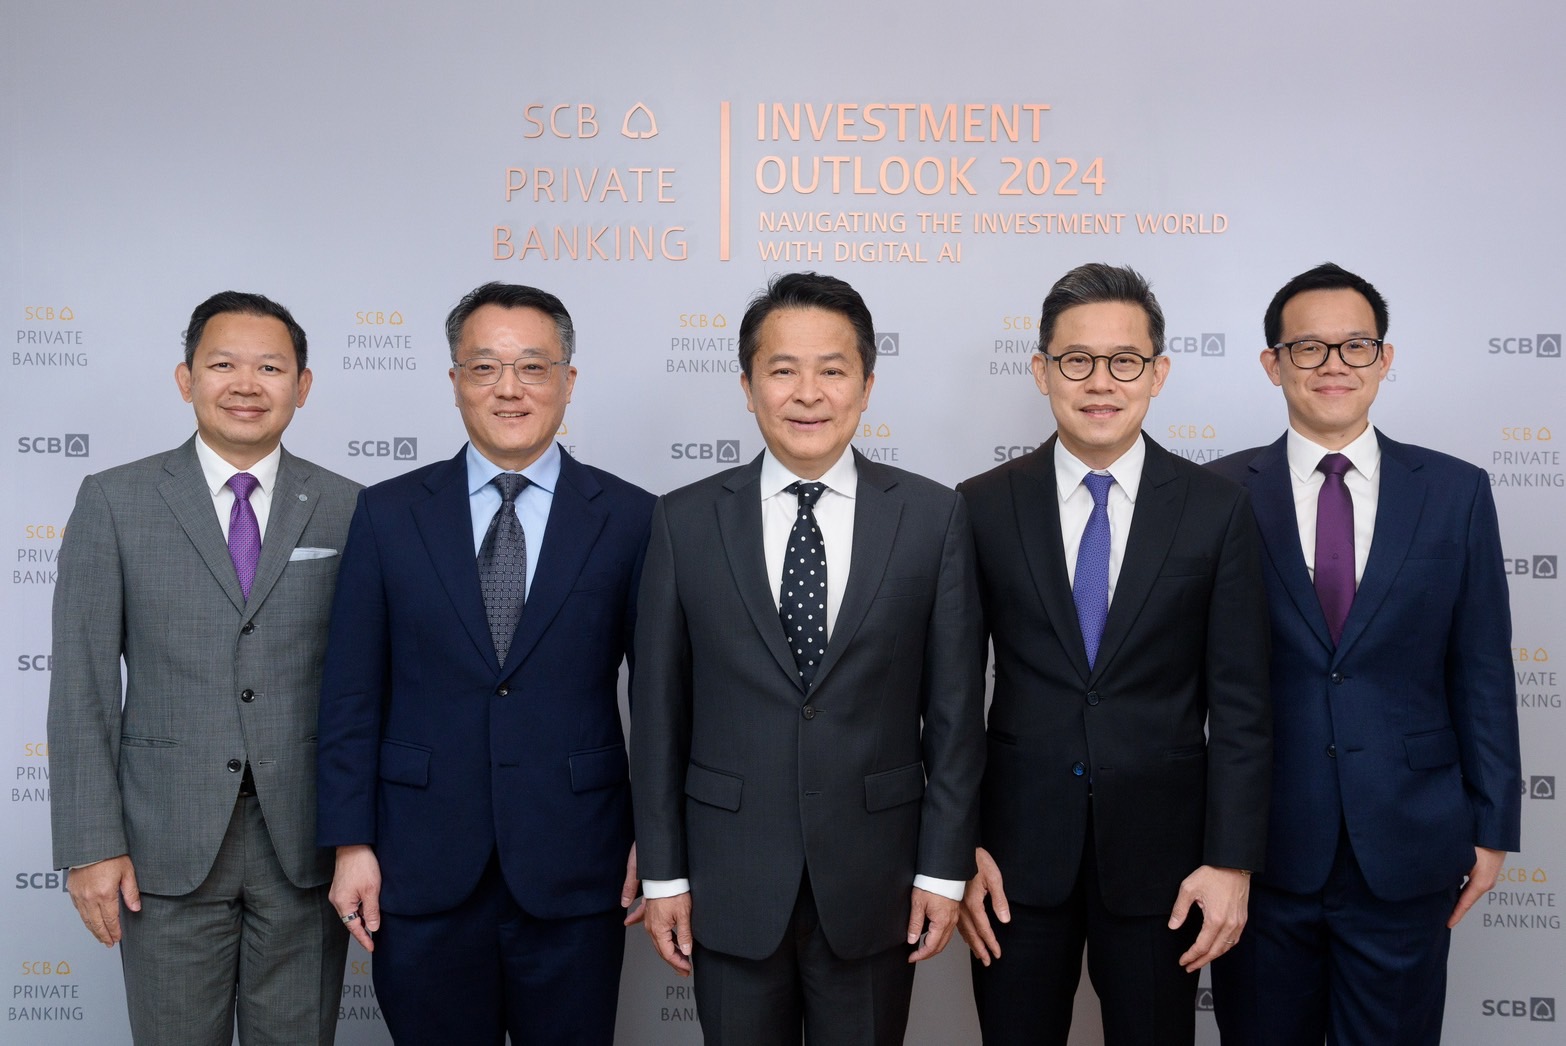 SCB PRIVATE BANKING Investment Outlook 2024   